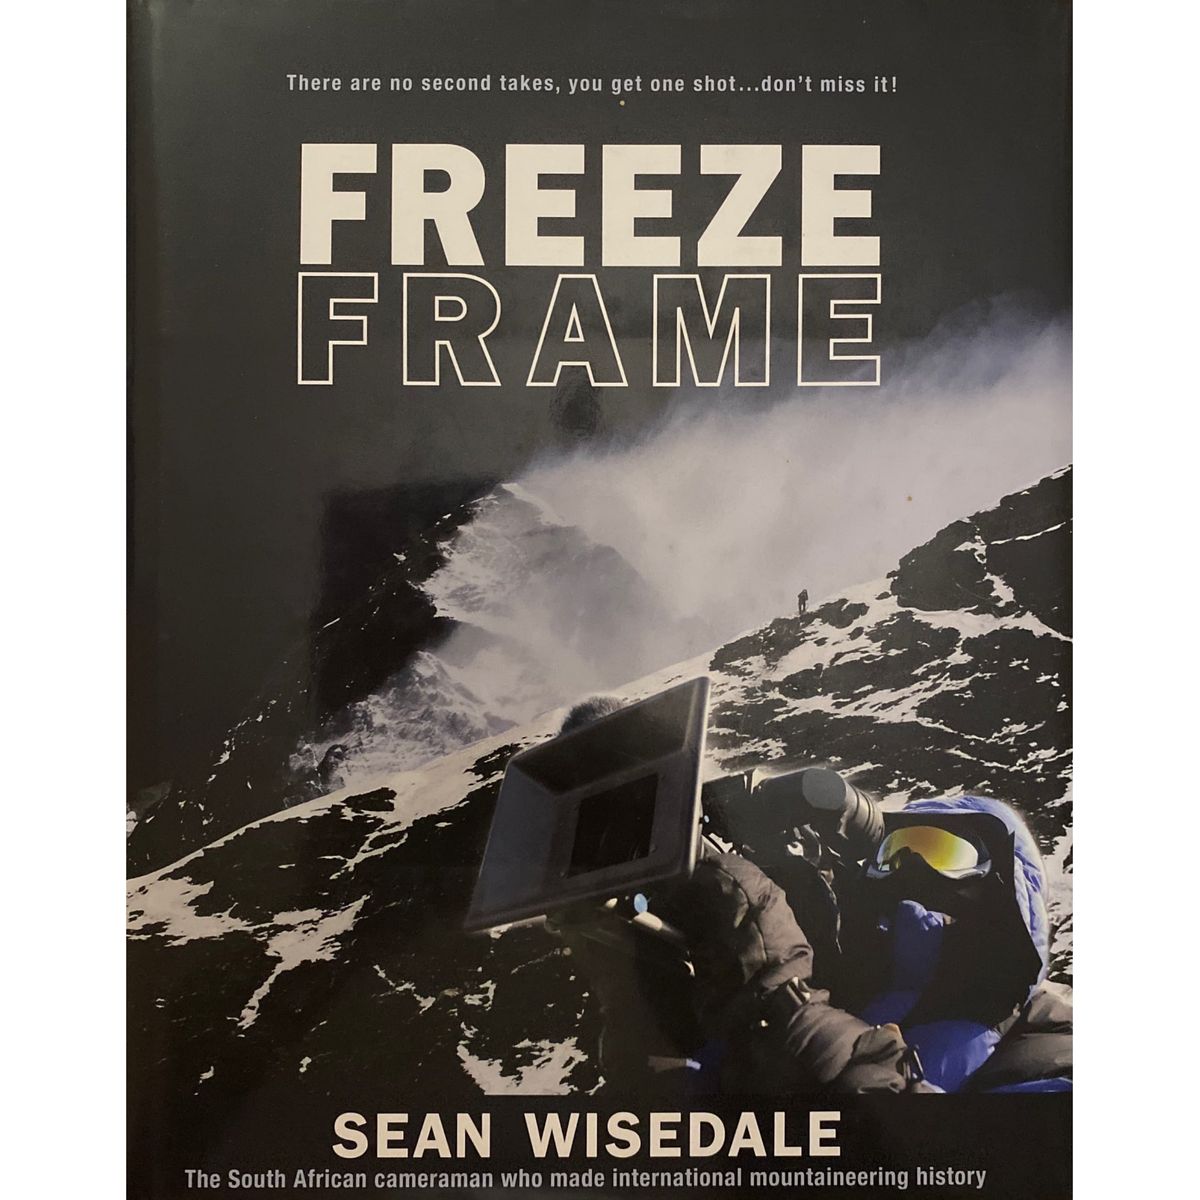 ISBN: 9780620340731 / 0620340738 - Freeze Frame by Sean Wisedale, Signed [2005]